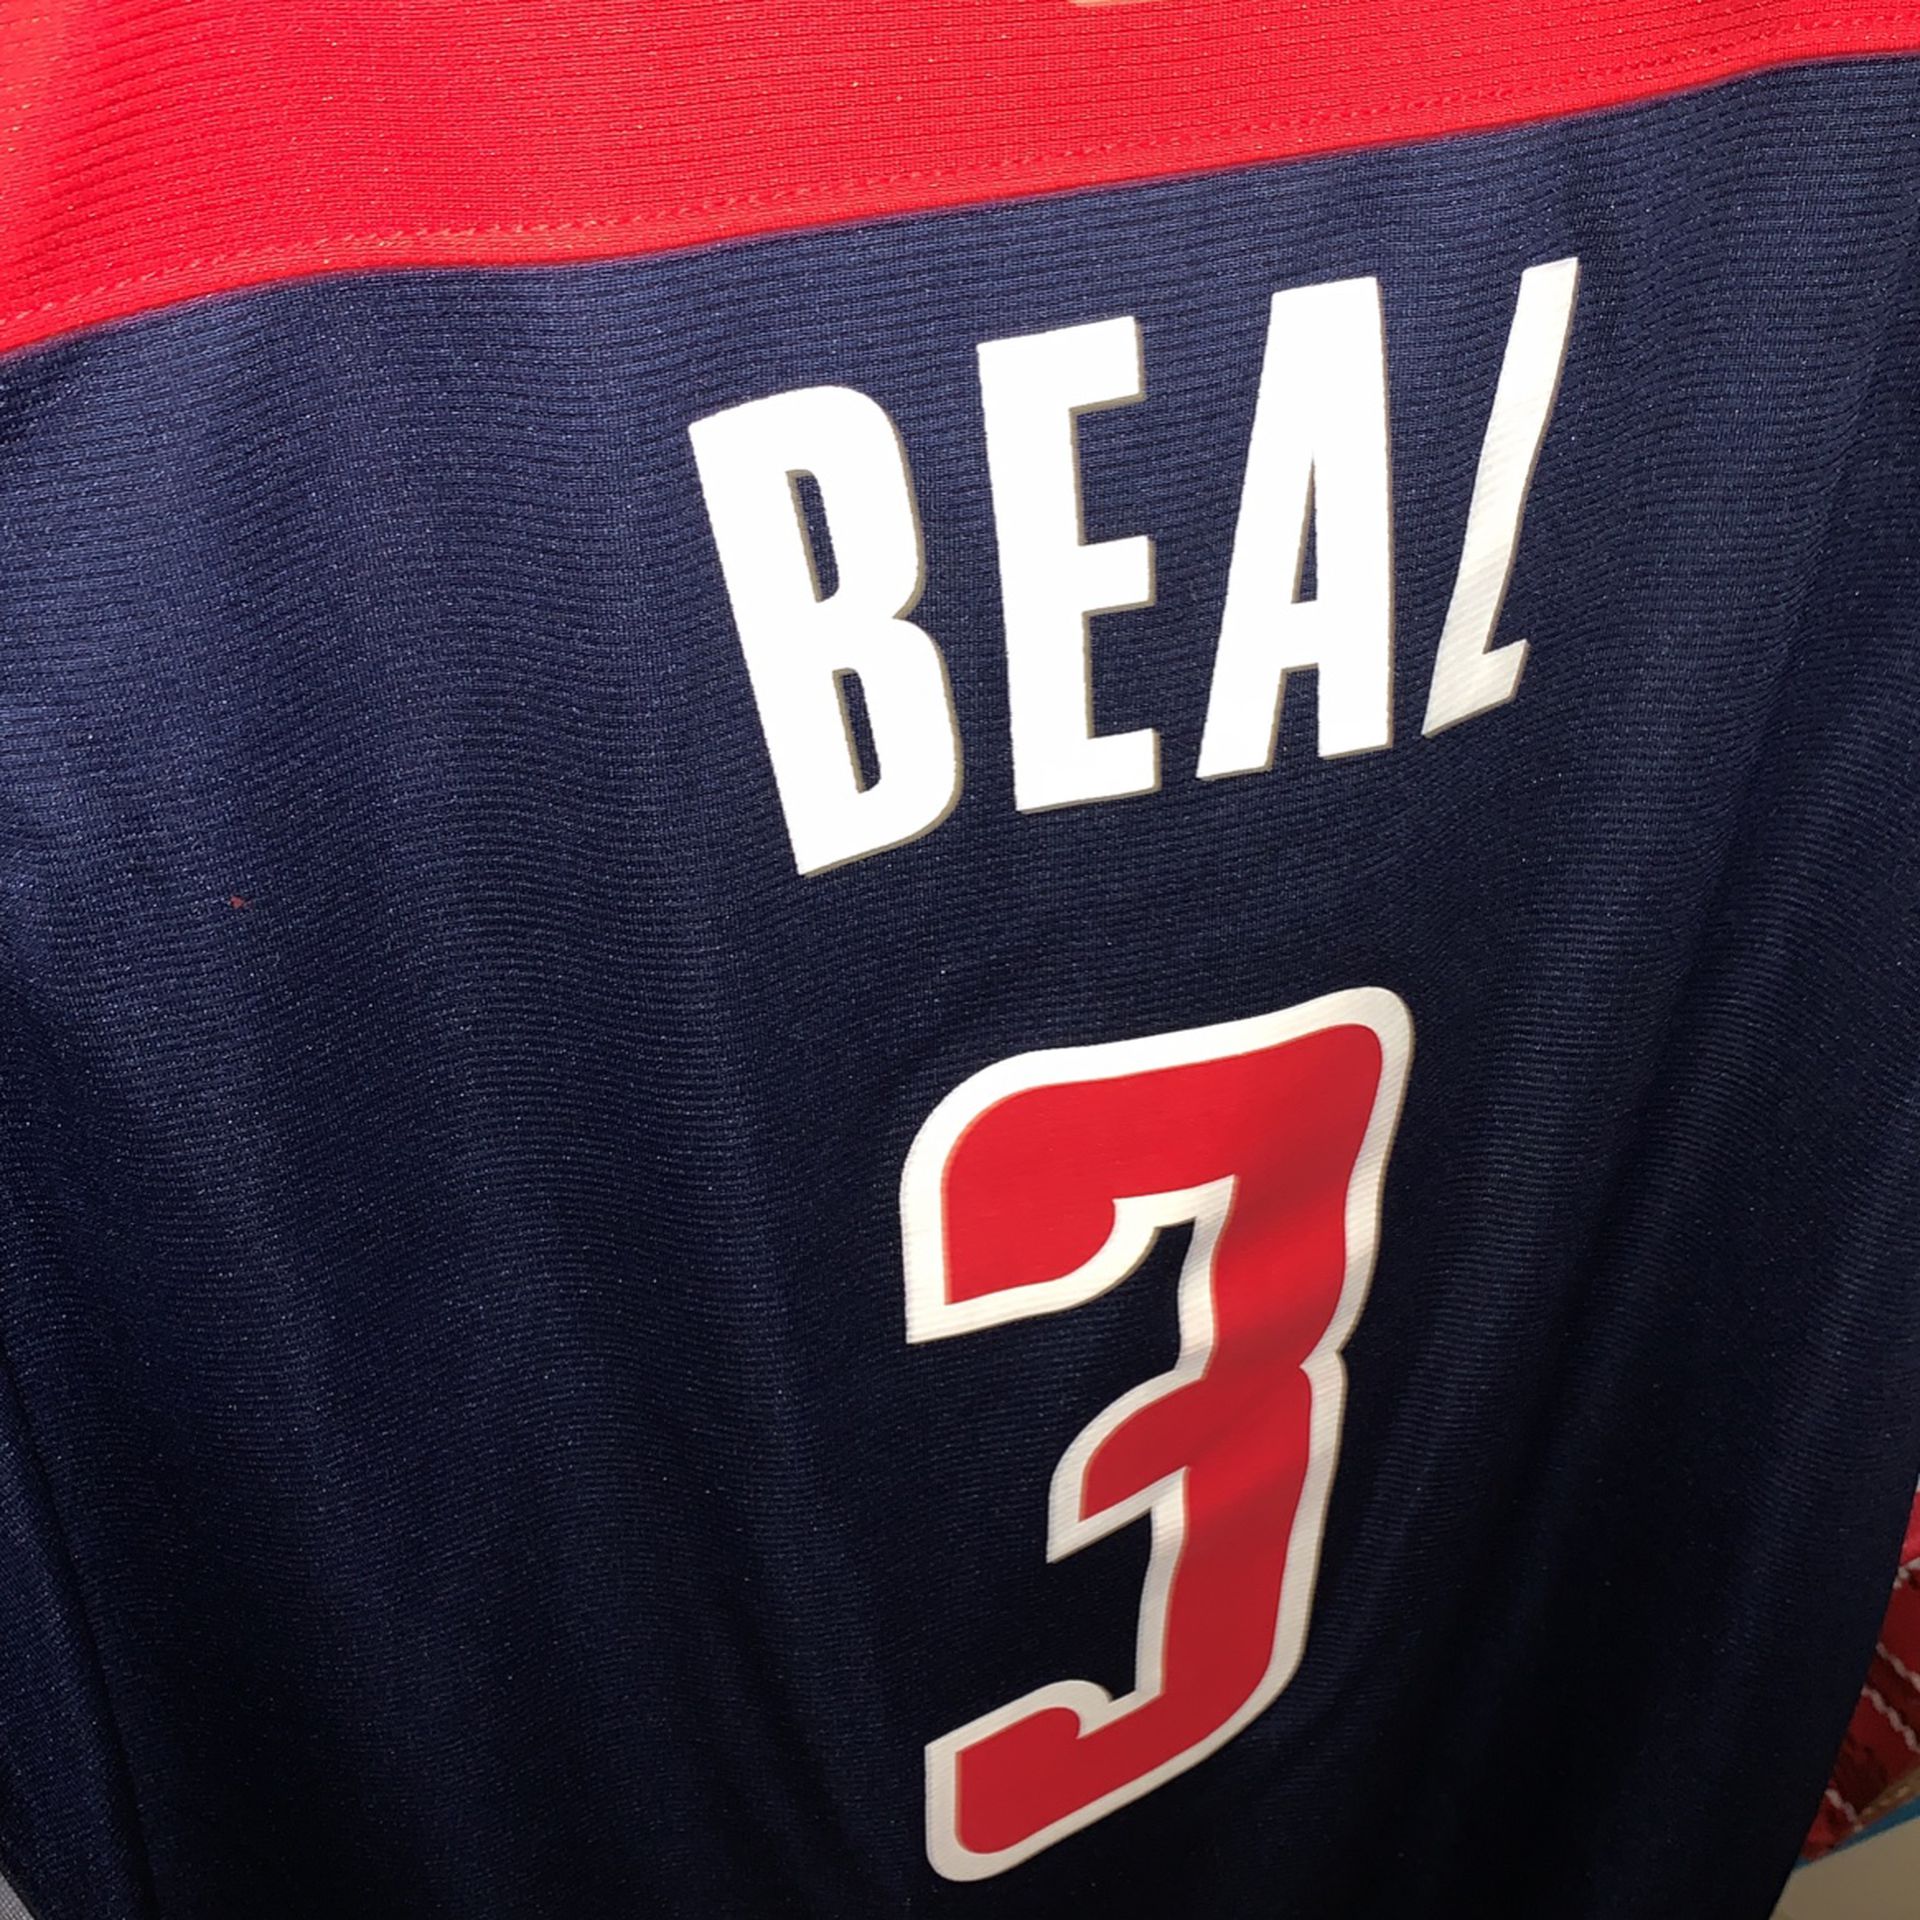 Washington Wizards Bradley Beal City Edition Jersey Nba Basketball for Sale  in San Diego, CA - OfferUp